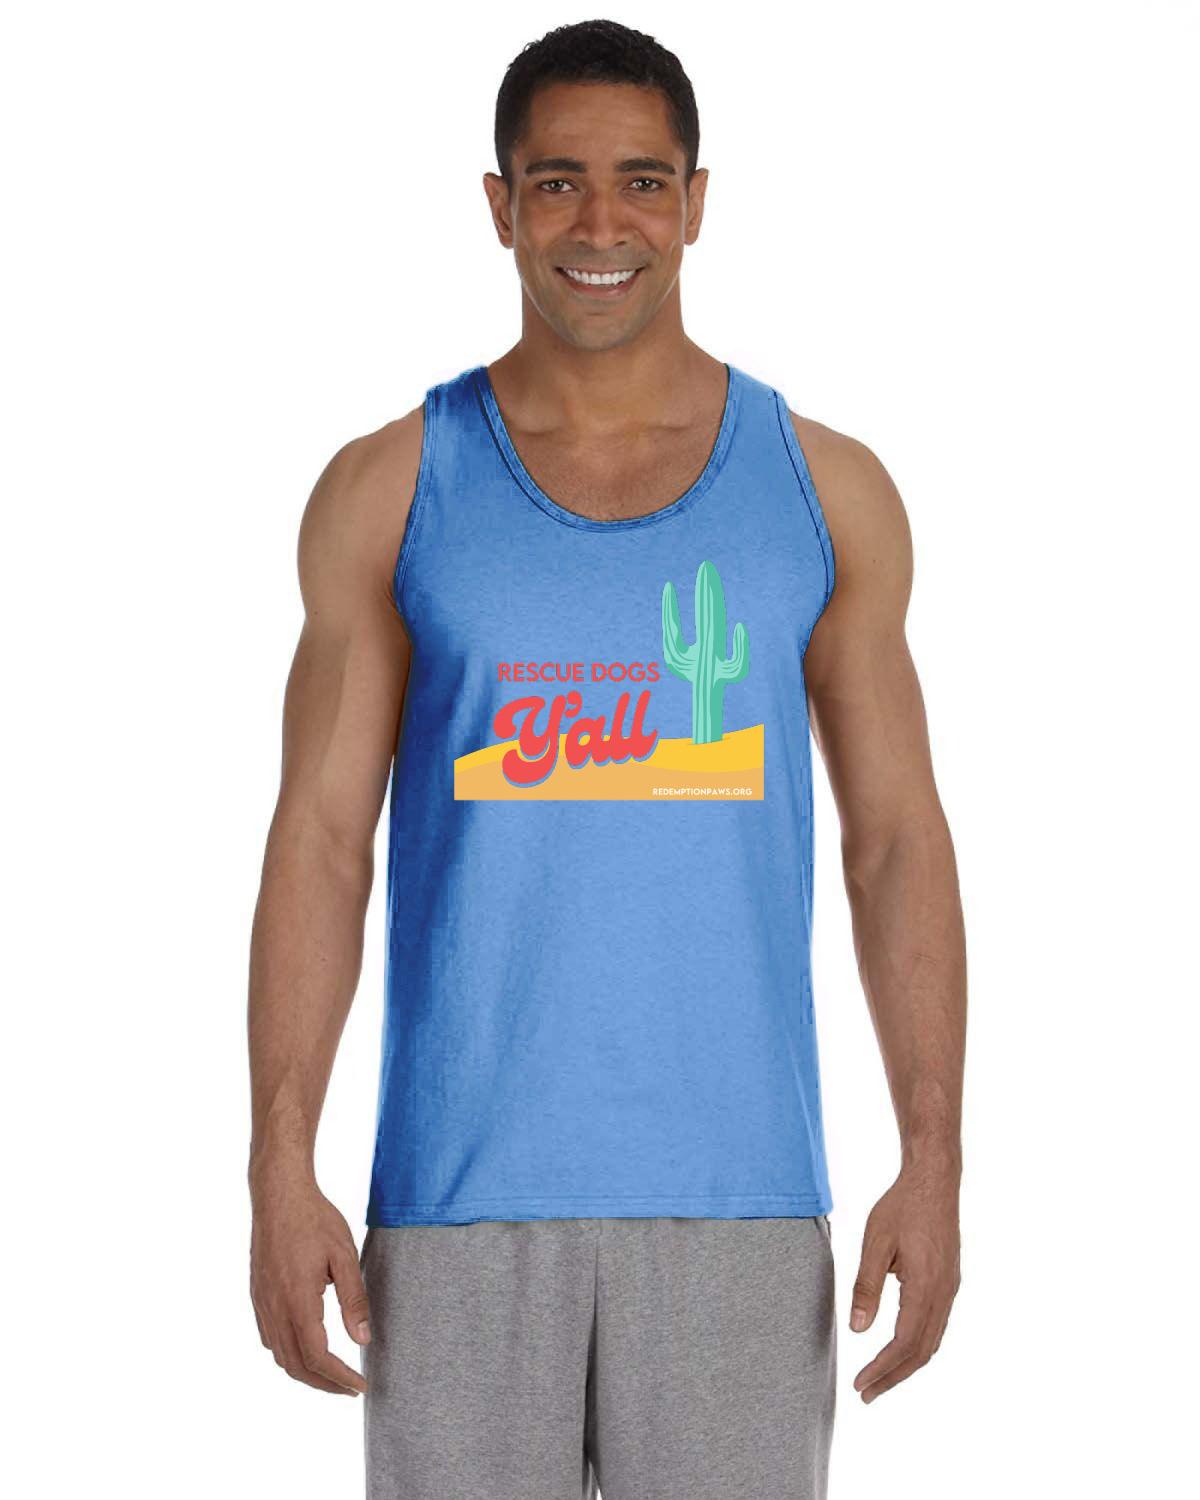 Rescue Dogs Y'all Tank Top